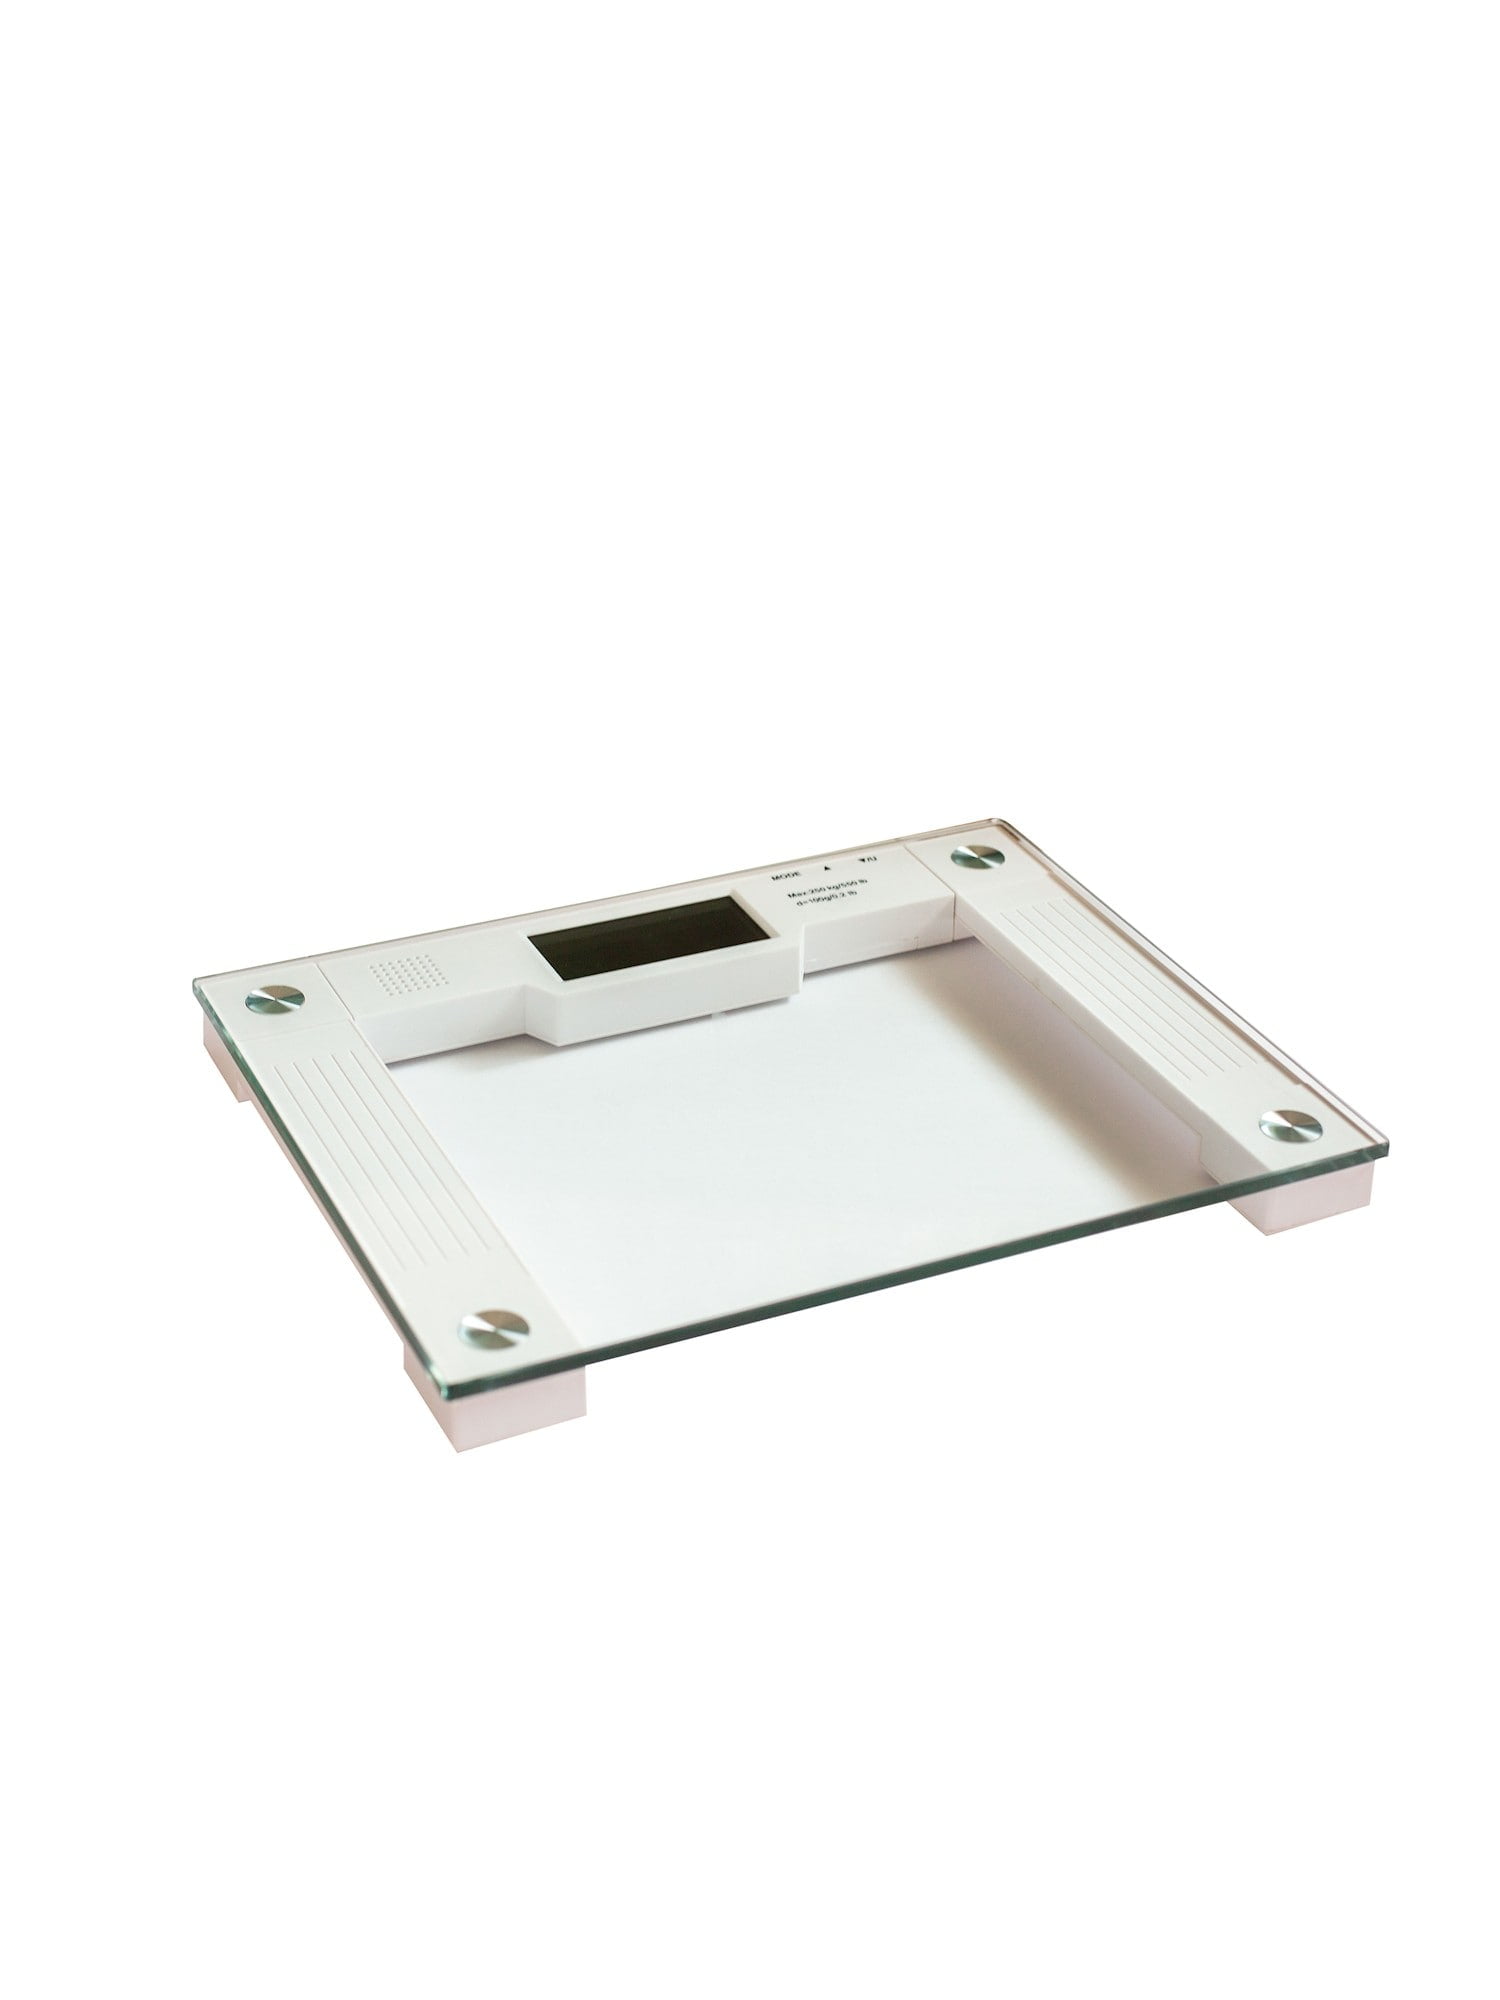 Talking Scale Extra Large Digital Weight Display Bathroom North